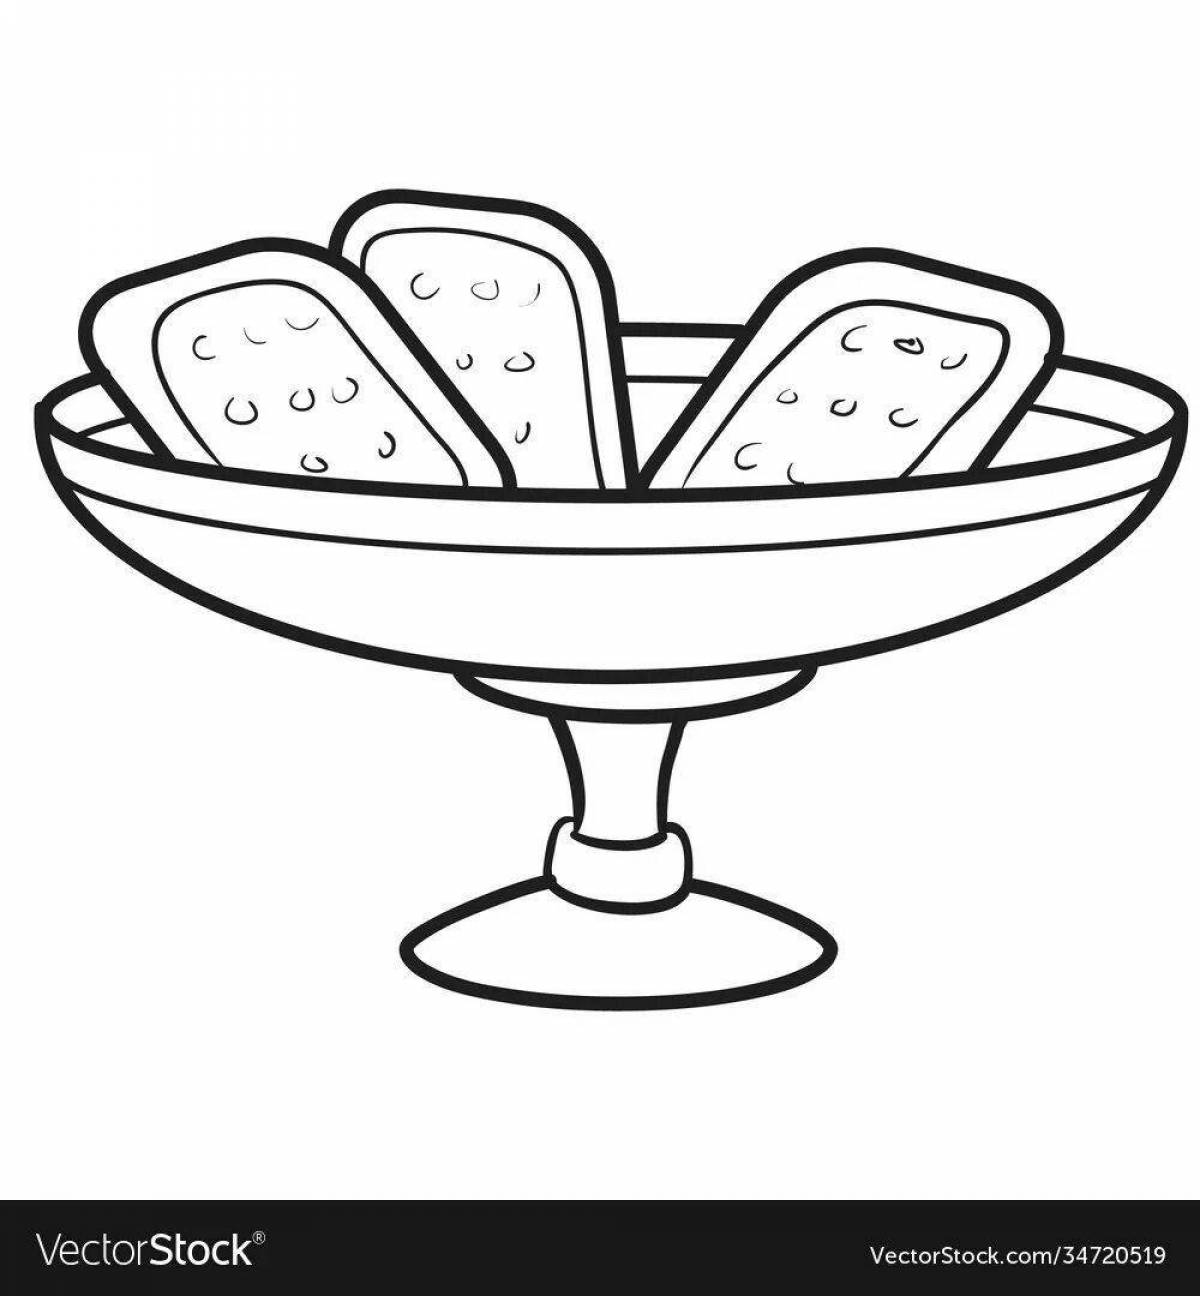 Attractive empty fruit bowl coloring book for kids